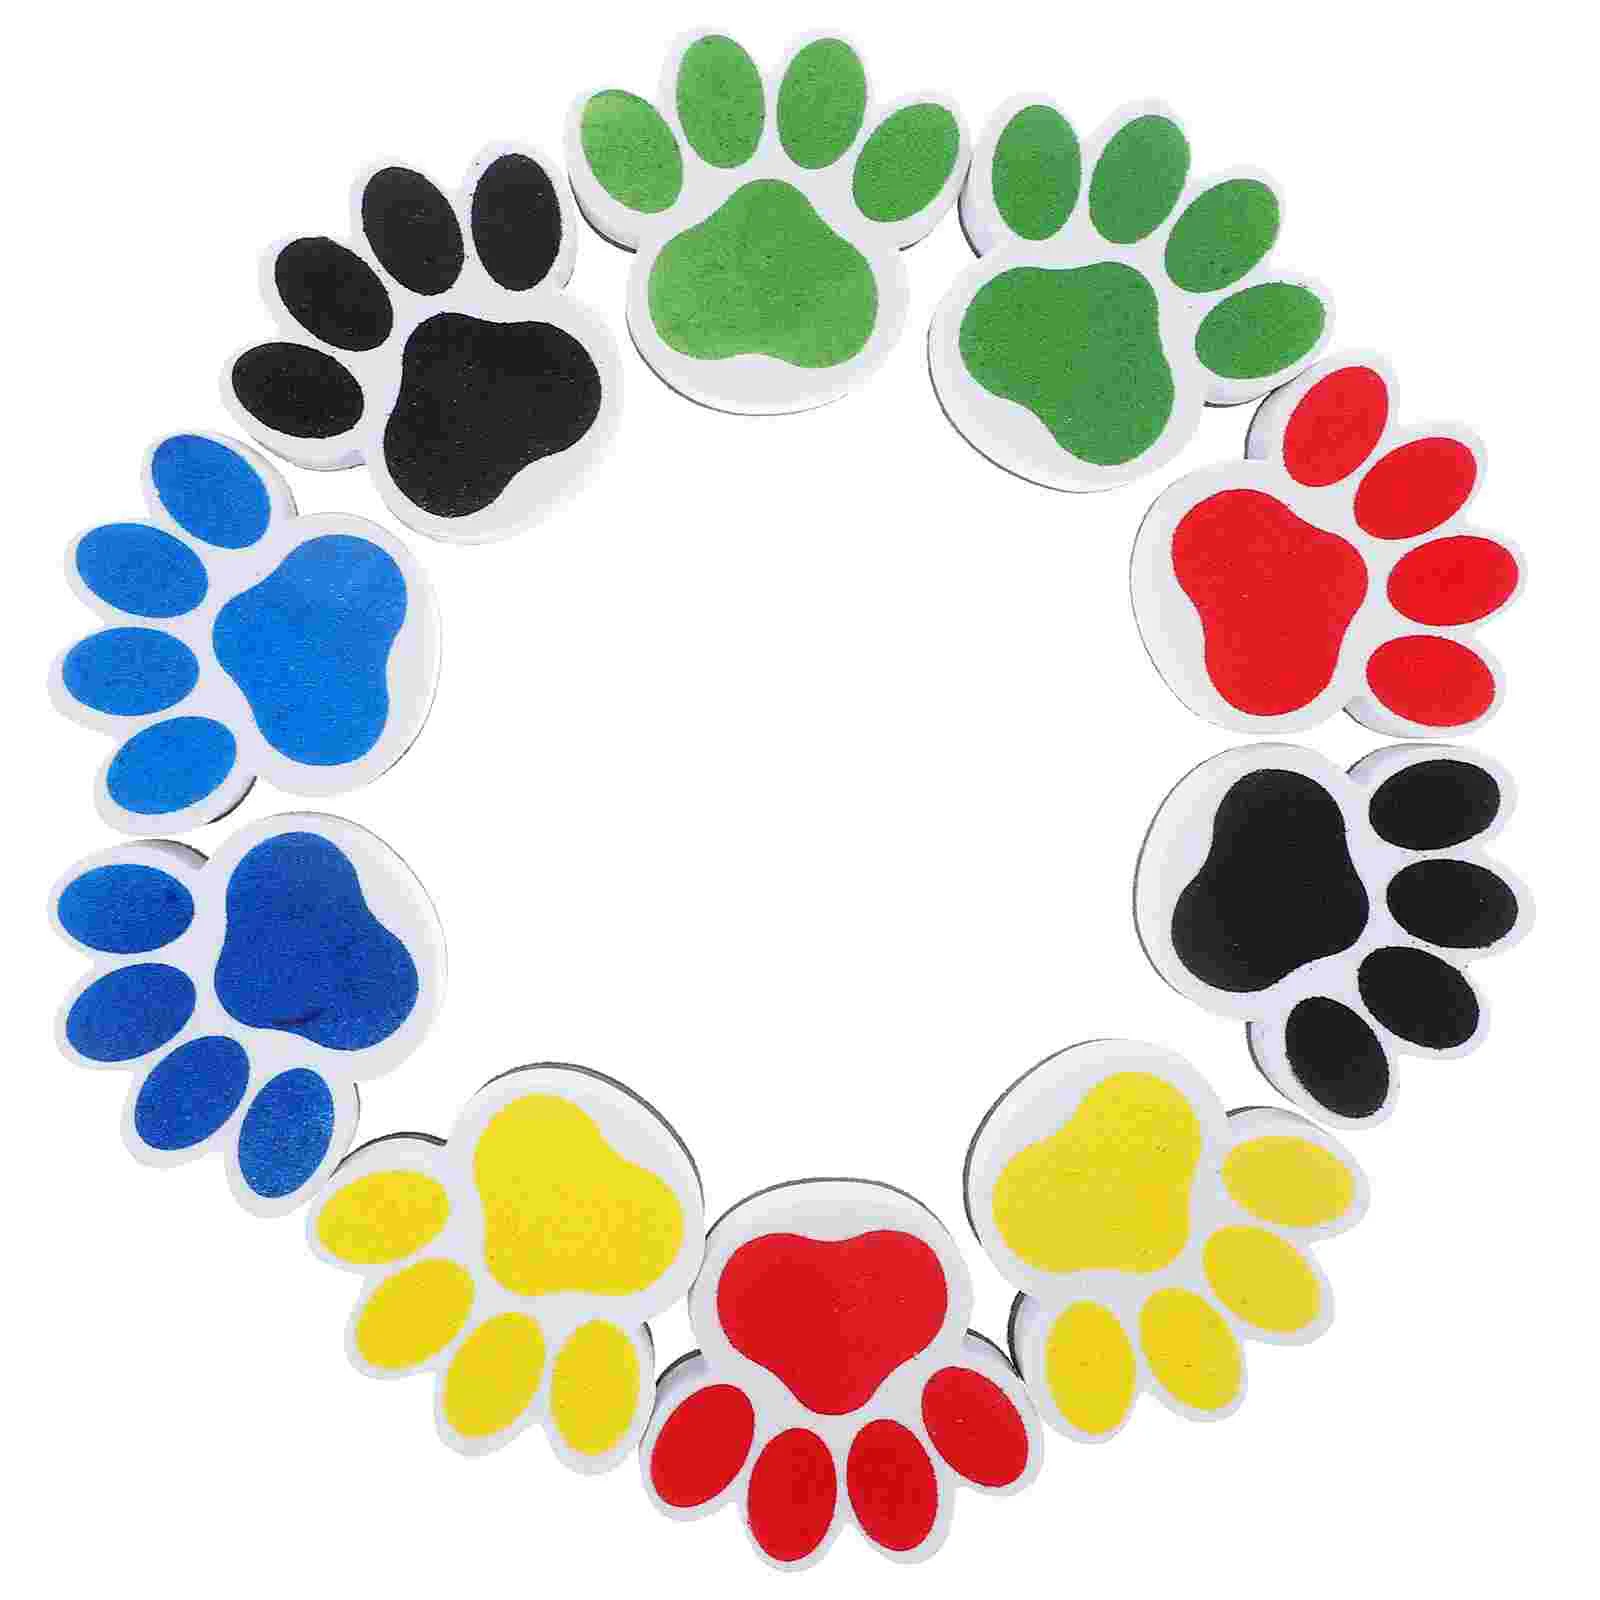 Magnetic White Board Erasers 10Pcs Paw Print Dry Erase Eraser Chalkboard Cleaner Cartoon Whiteboard Erasers Classroom 2pc set magnetic blackboard eraser whiteboard erasers dry erase marker white board cleaner school office supplies car clean